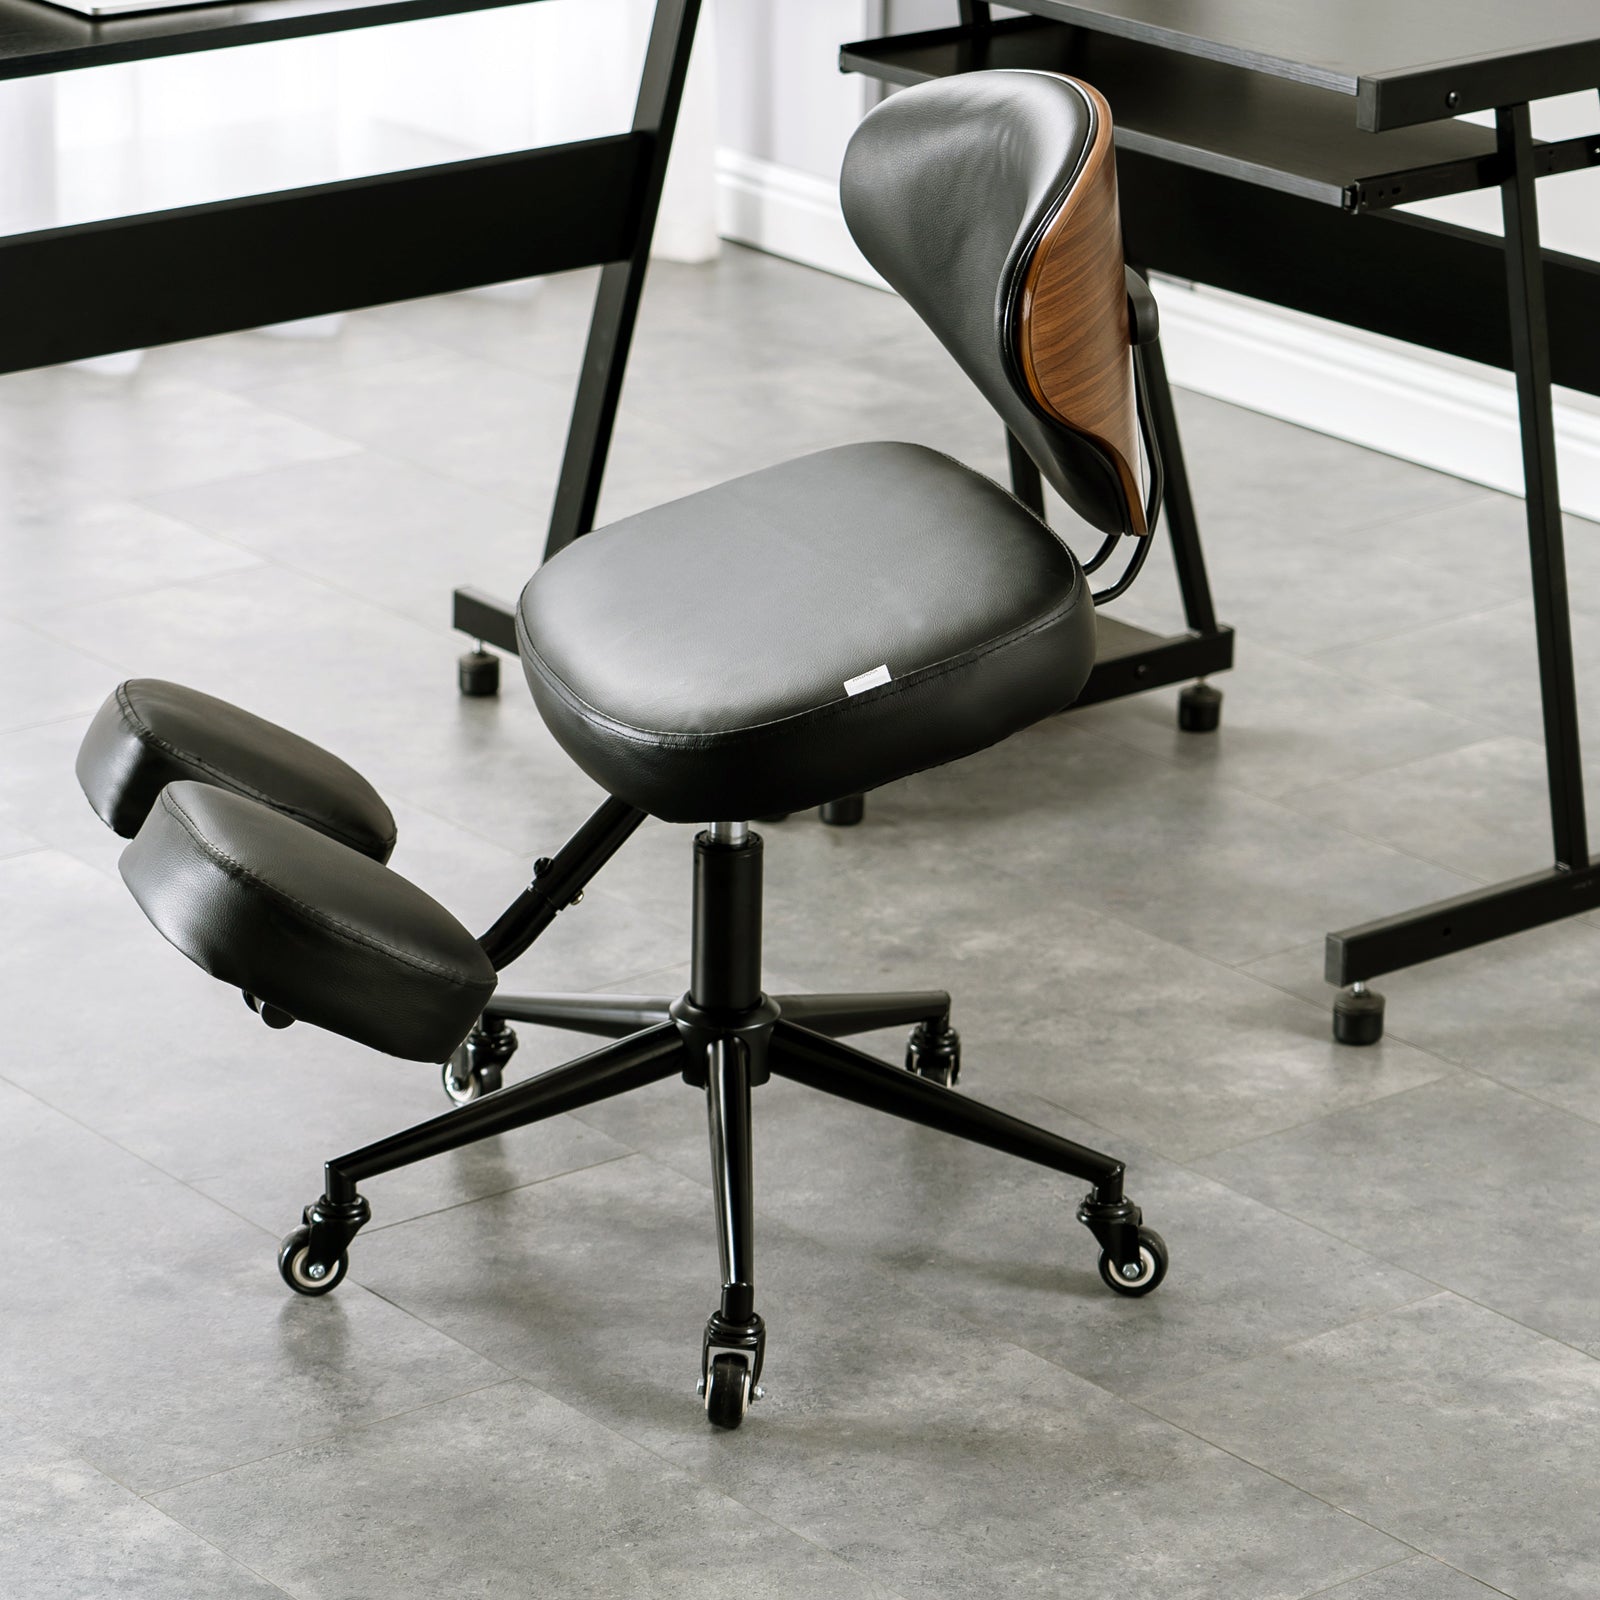 YOOMEMM Balance Chair with Backrest,Kneeling Chair with Casters, Impro